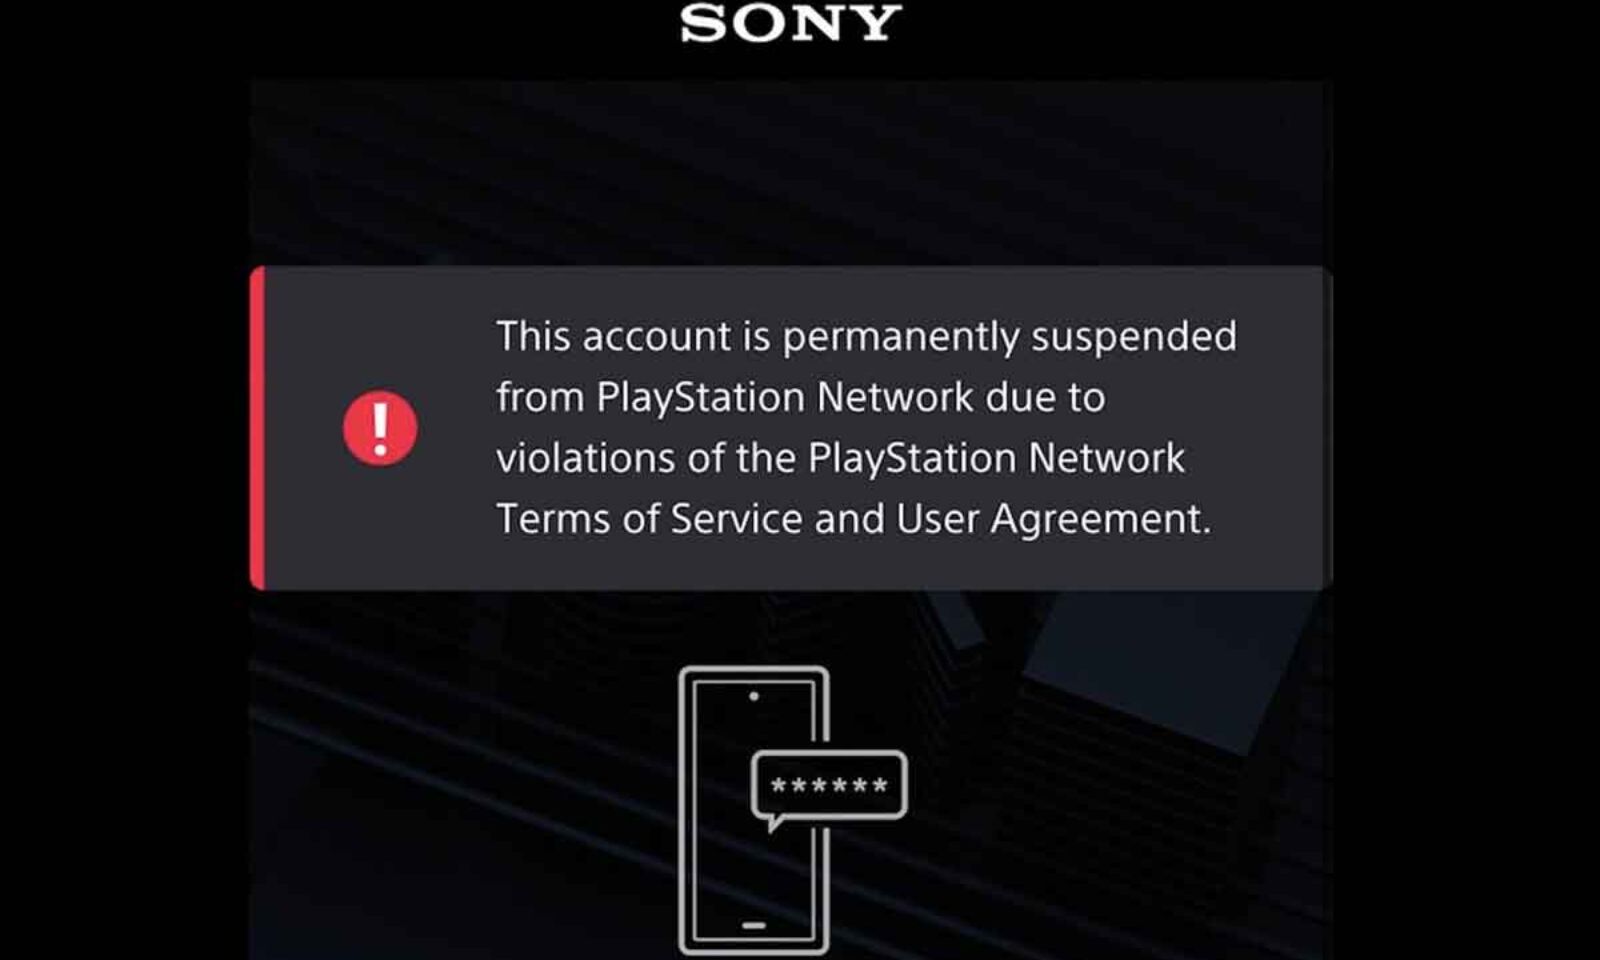 playstation network terms of service